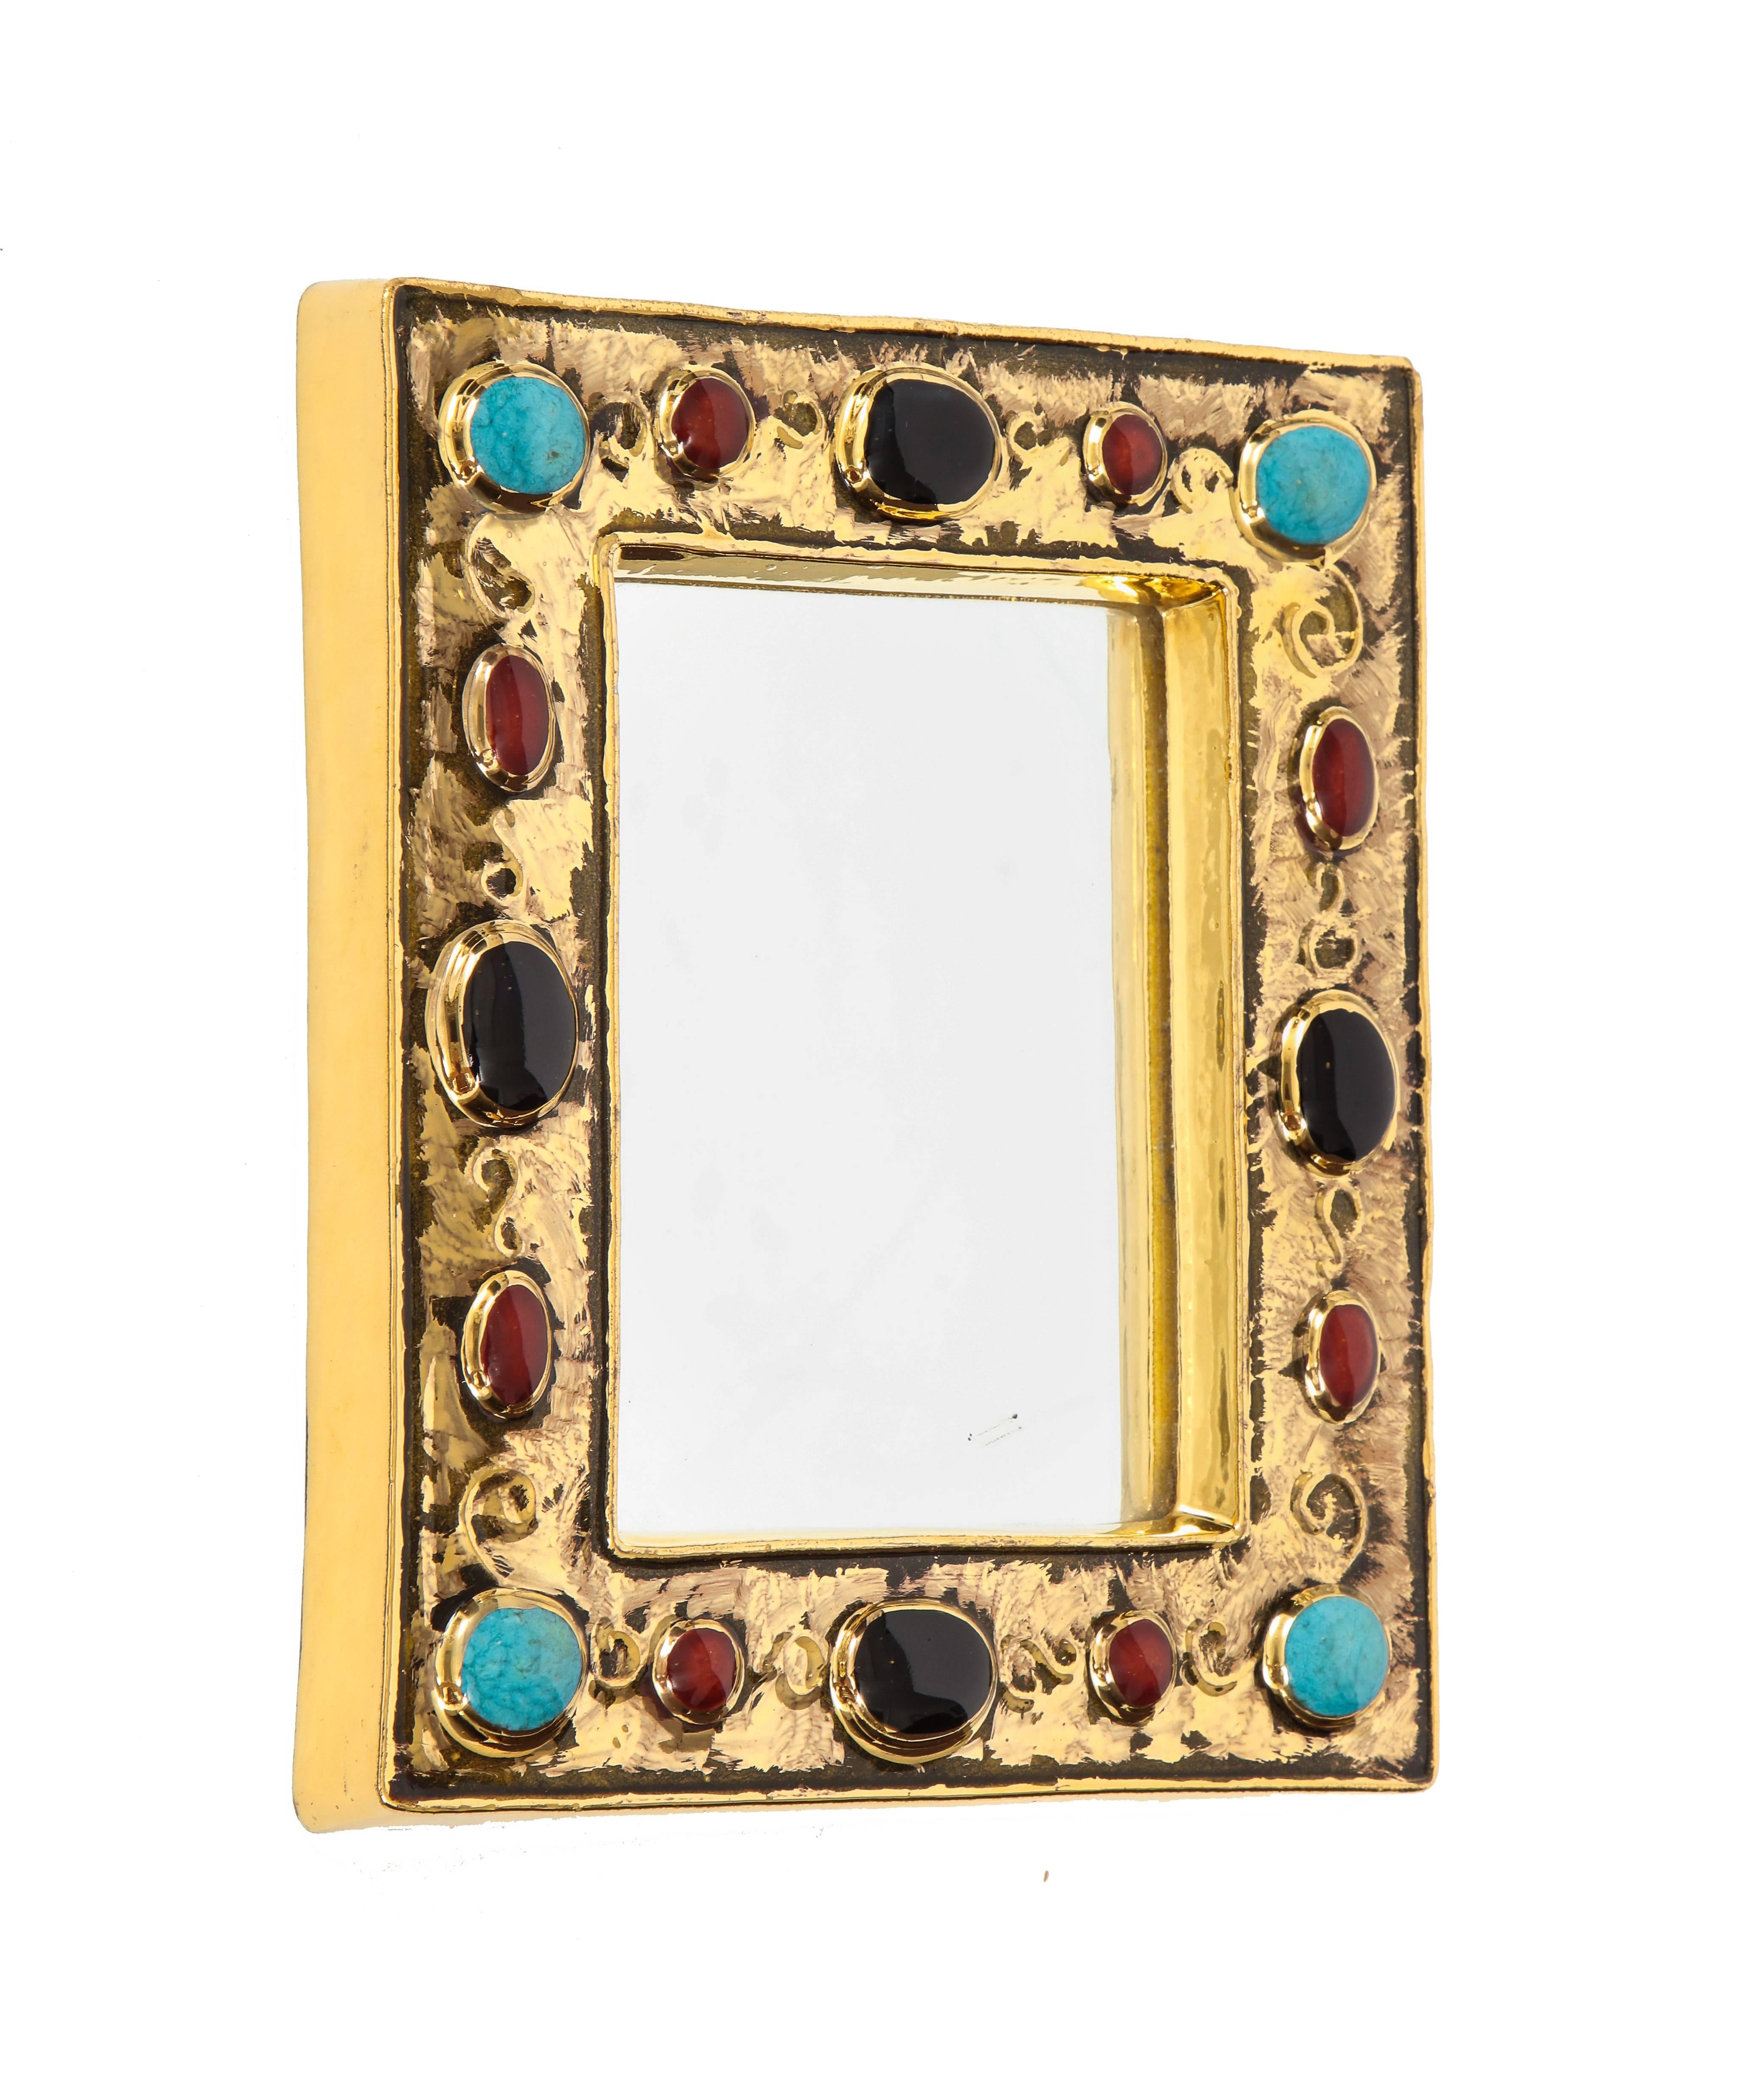 Mid-Century Modern Francois Lembo Mirror, Ceramic, Gold, Turquoise, Black and Red, Jeweled, Signed